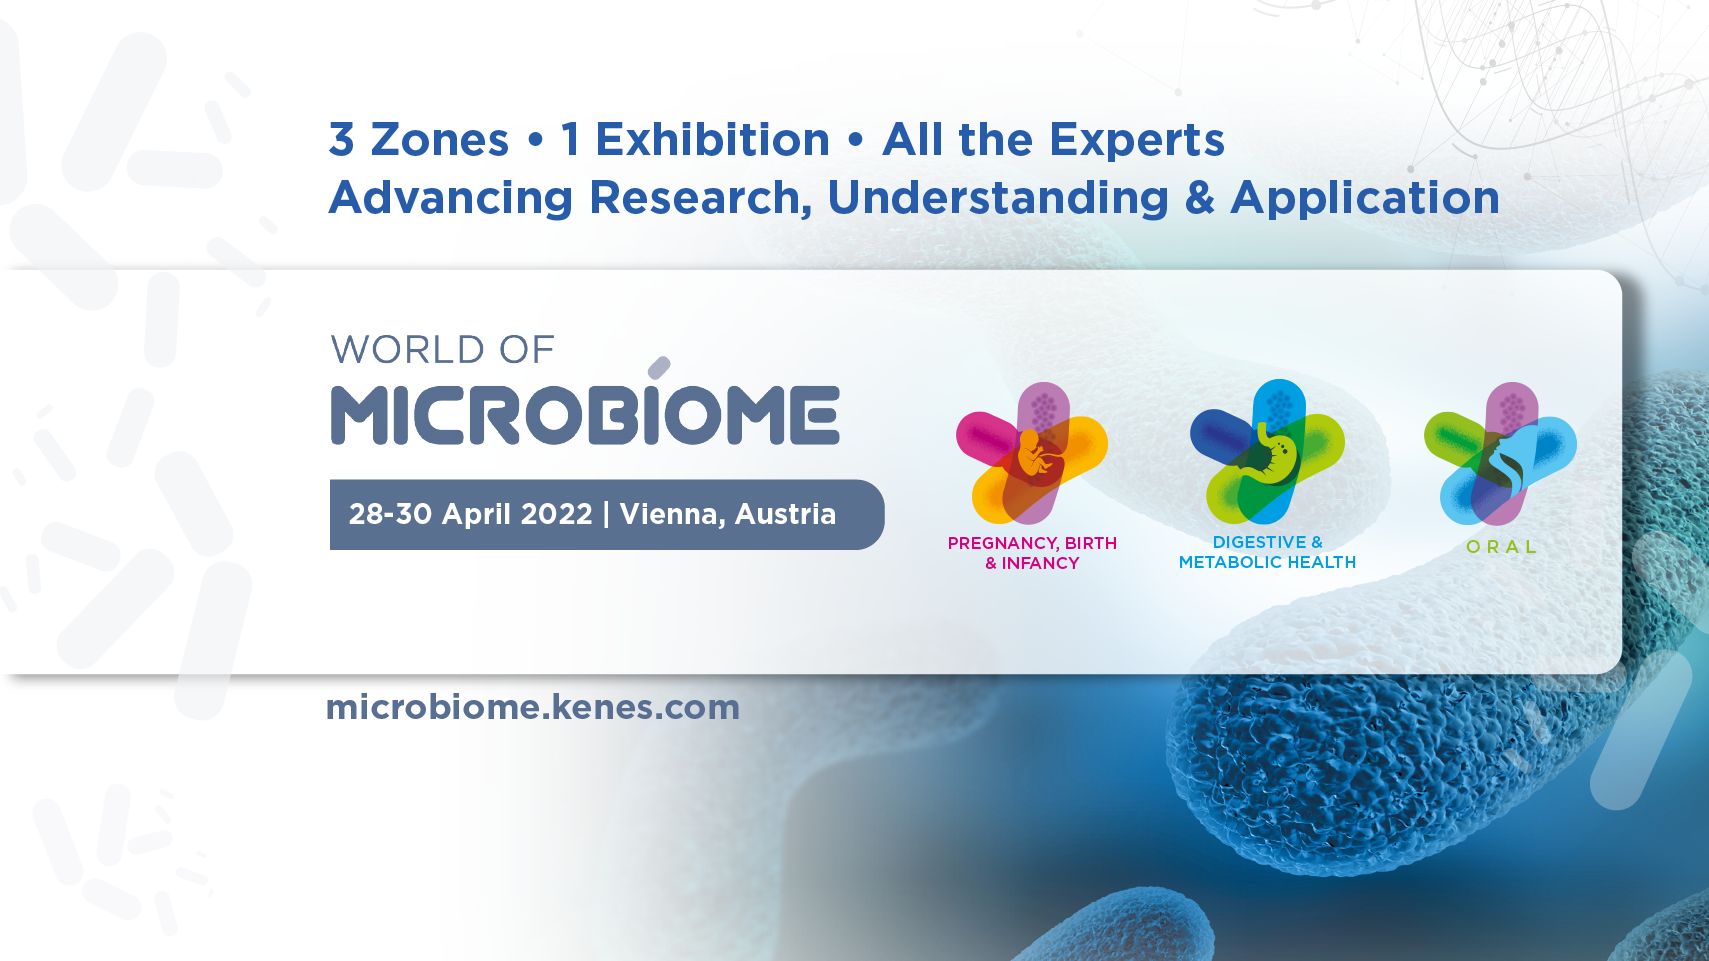 World of Microbiome Conference, Vienna, Austria